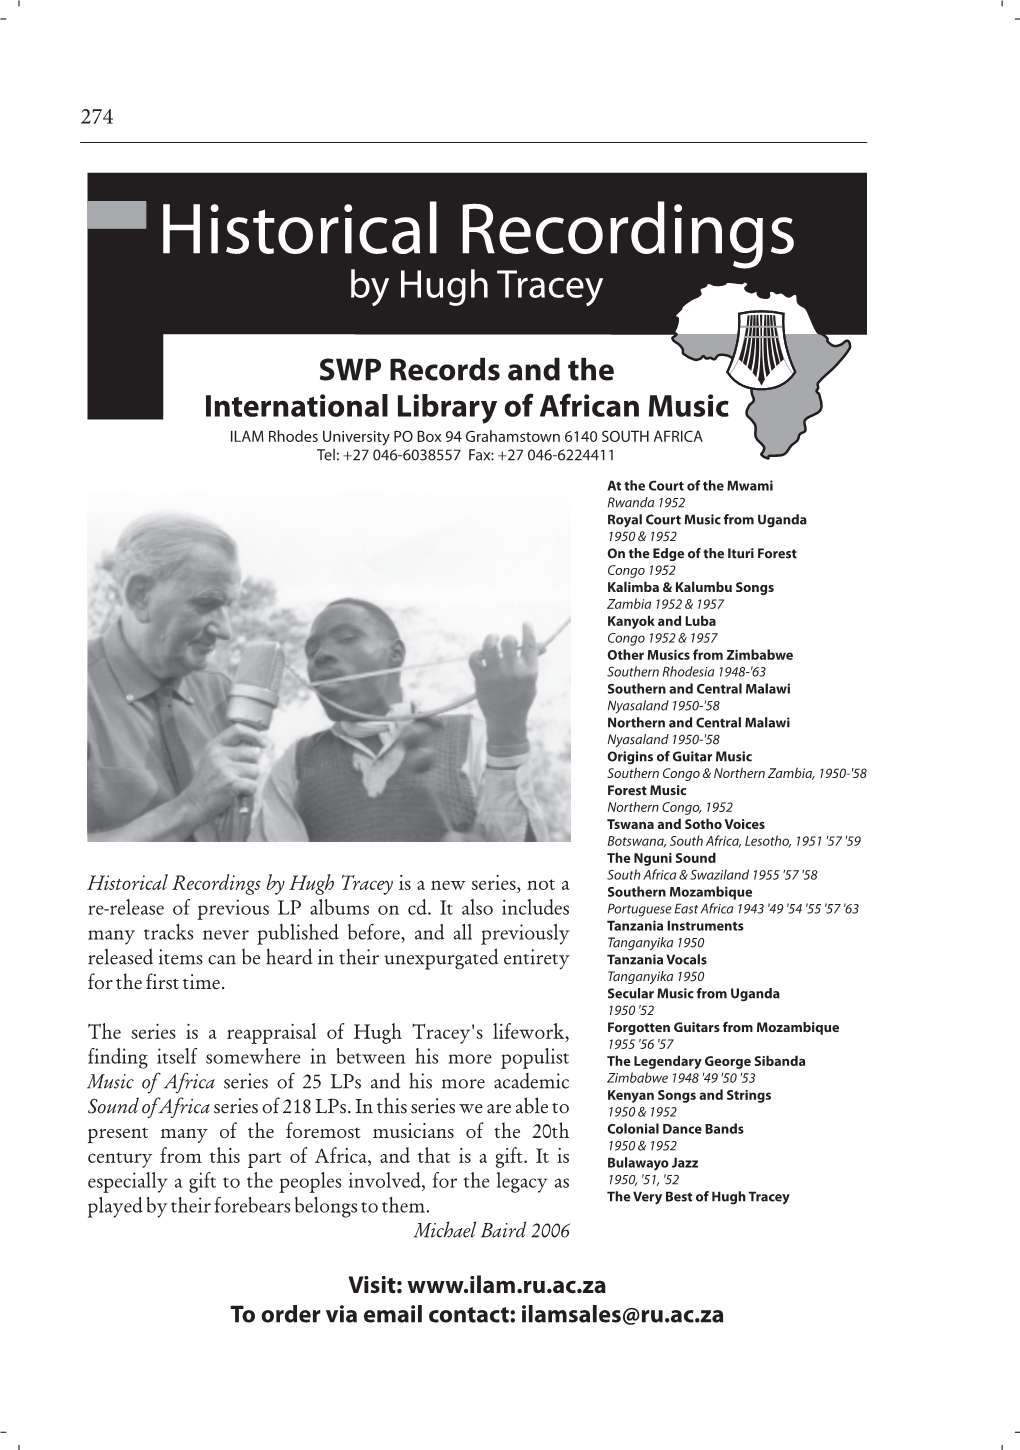 Historical Recordings by Hugh Tracey